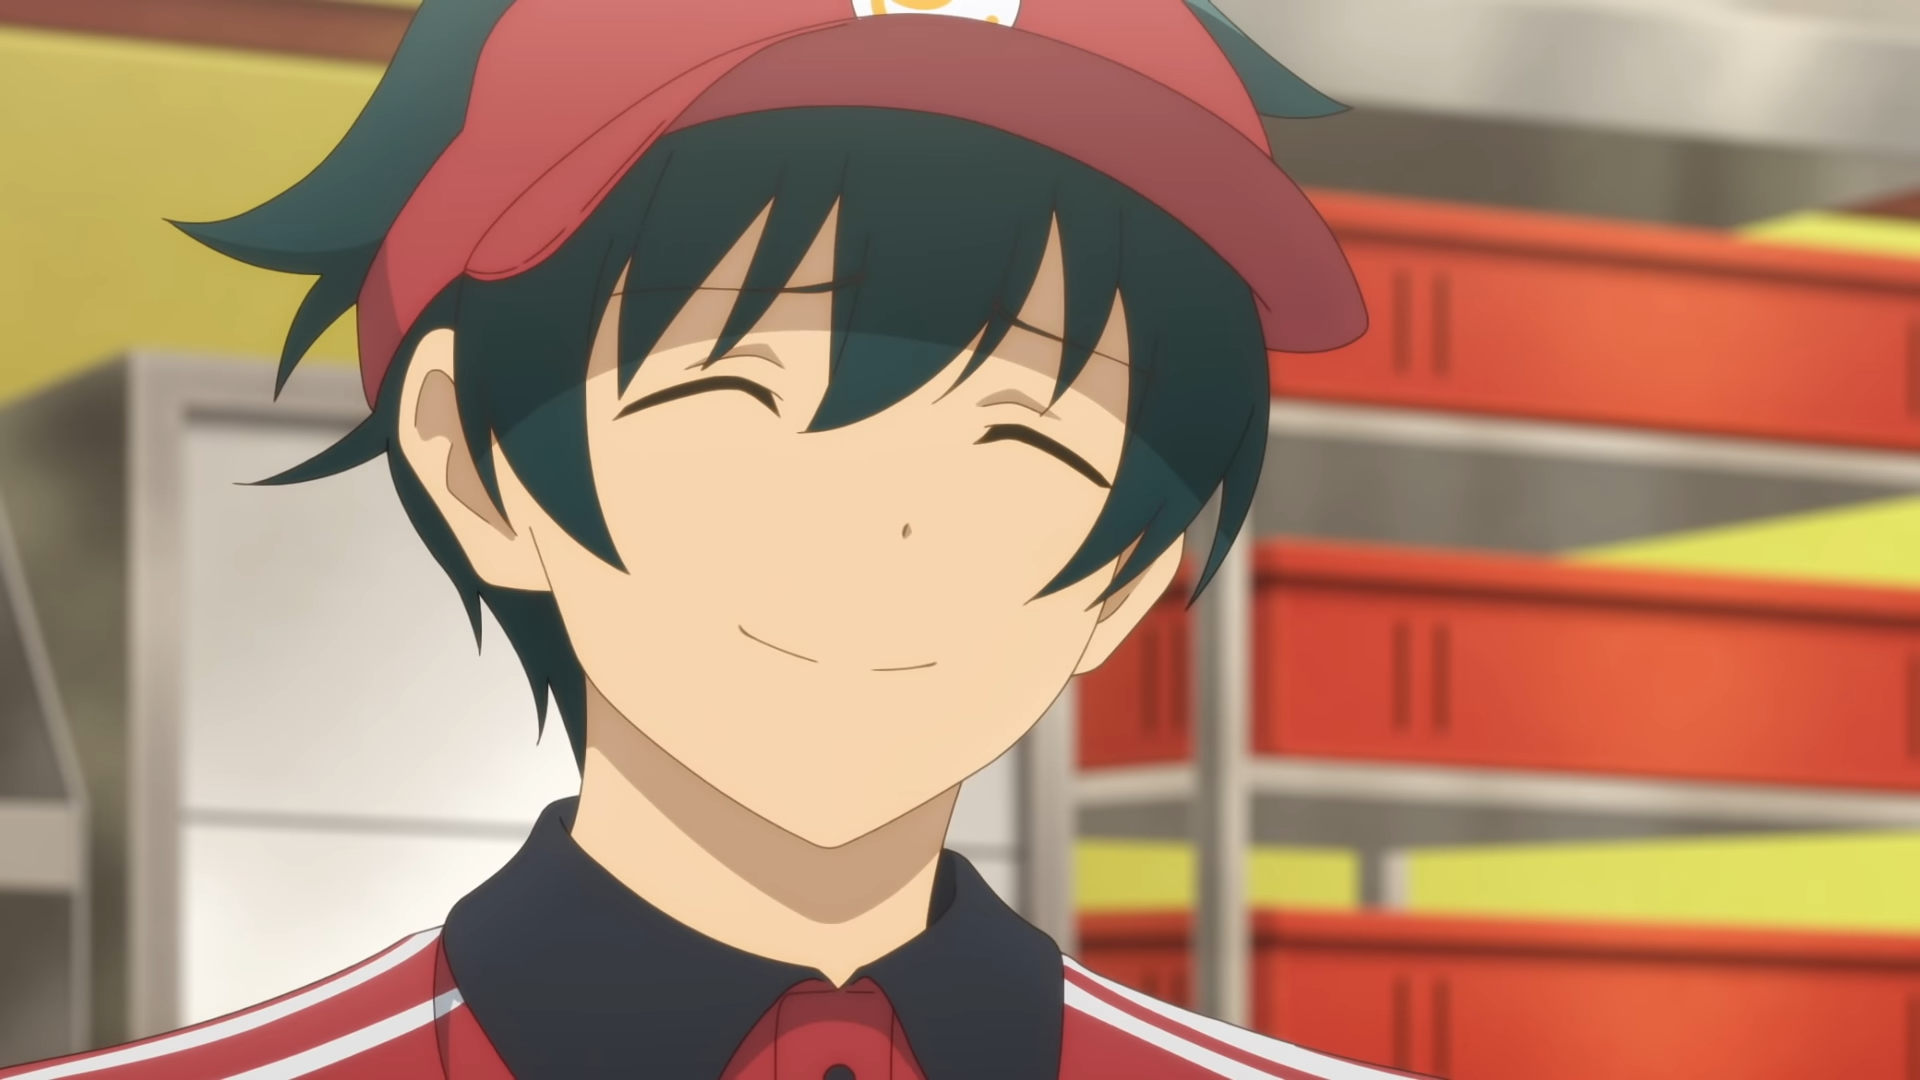 The Devil Is a Part-Timer png images